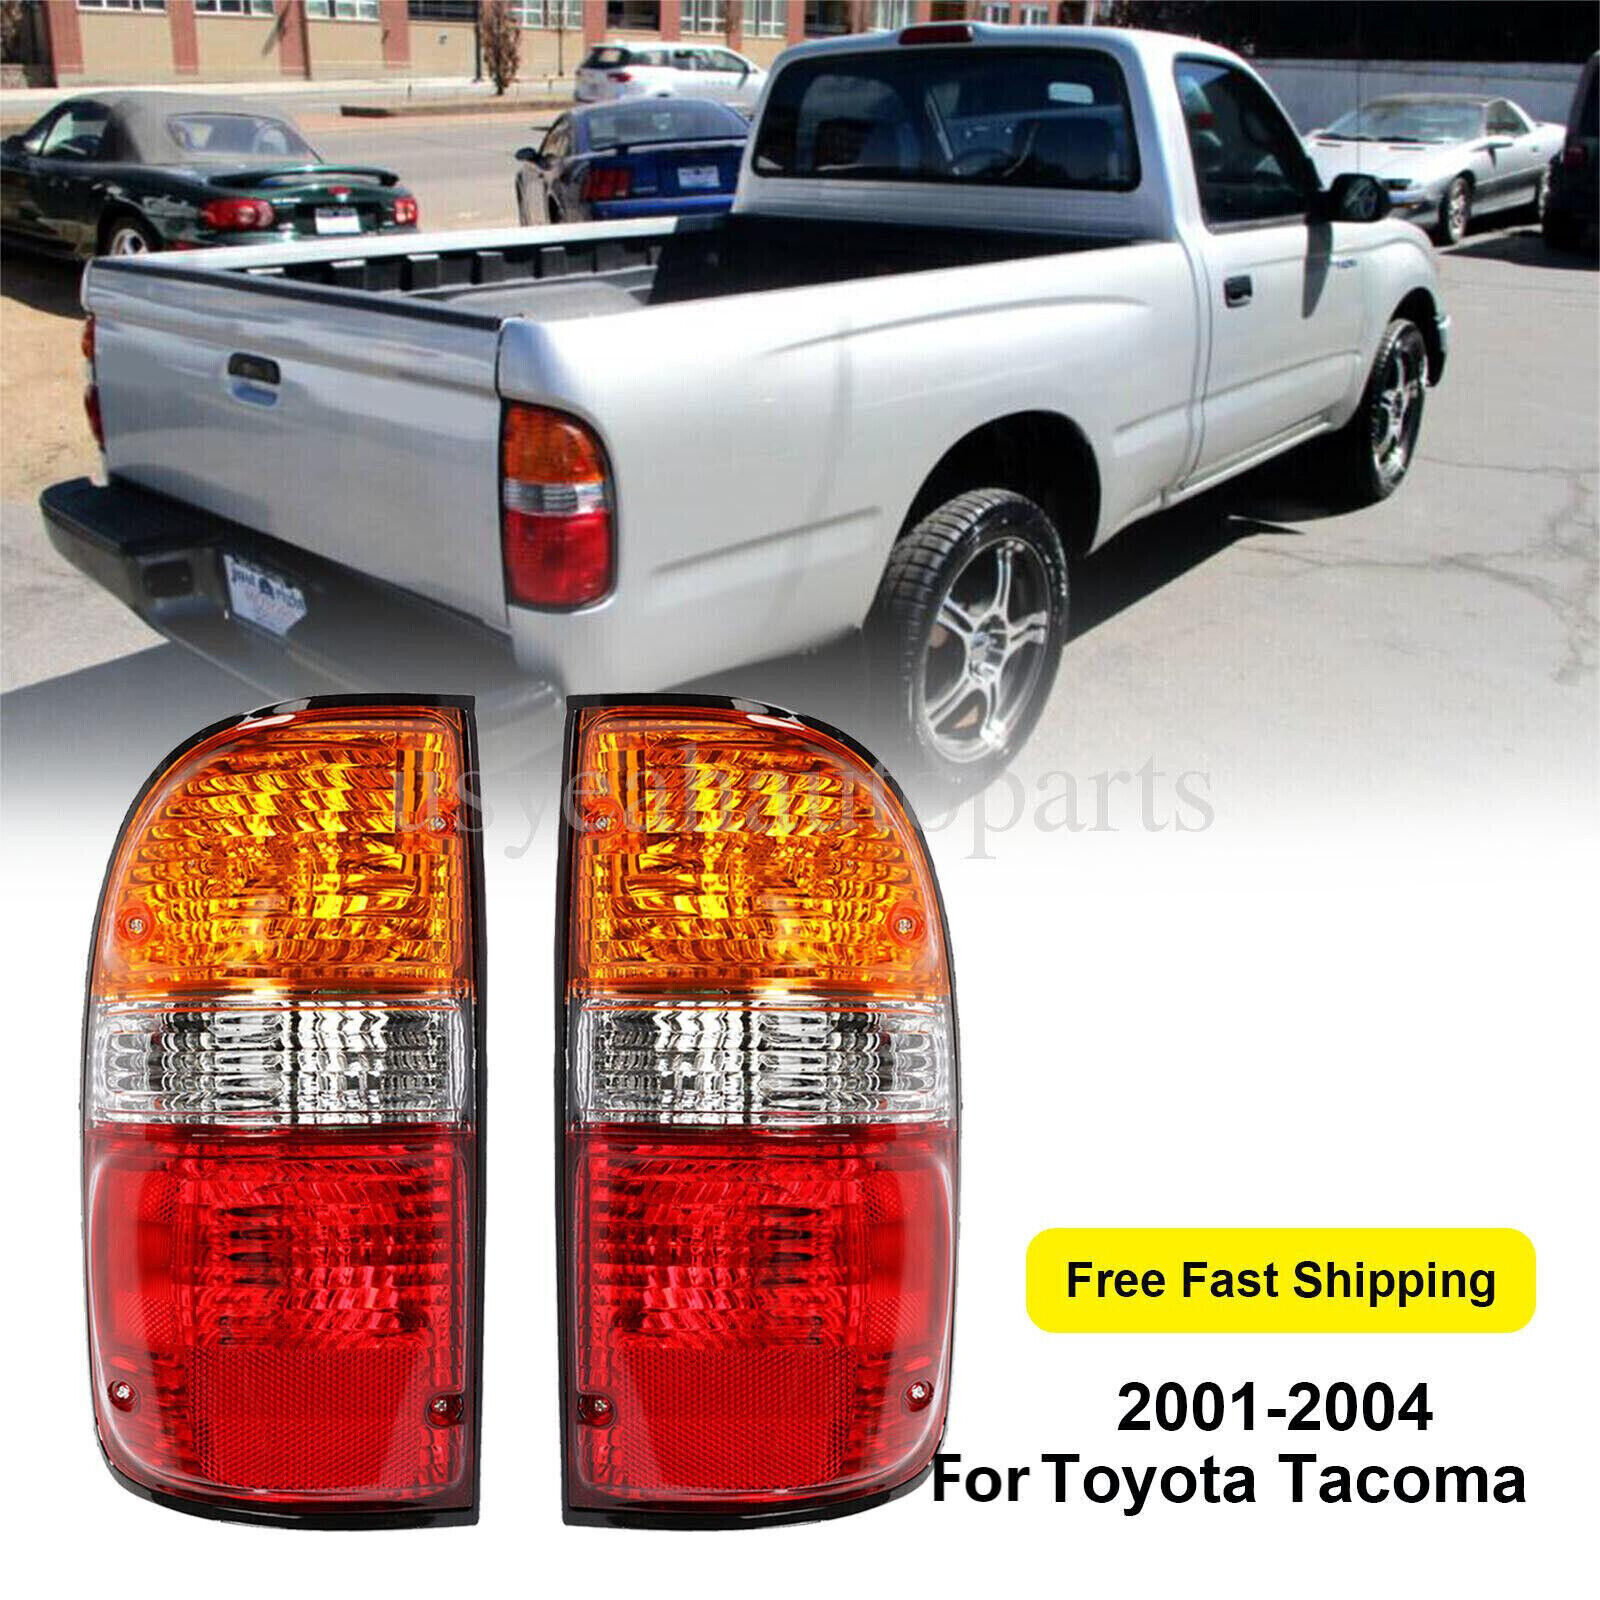 Pair Left & Right Tail Lights Brake Lamps For Toyota Tacoma 2001-2004 W/Bulbs